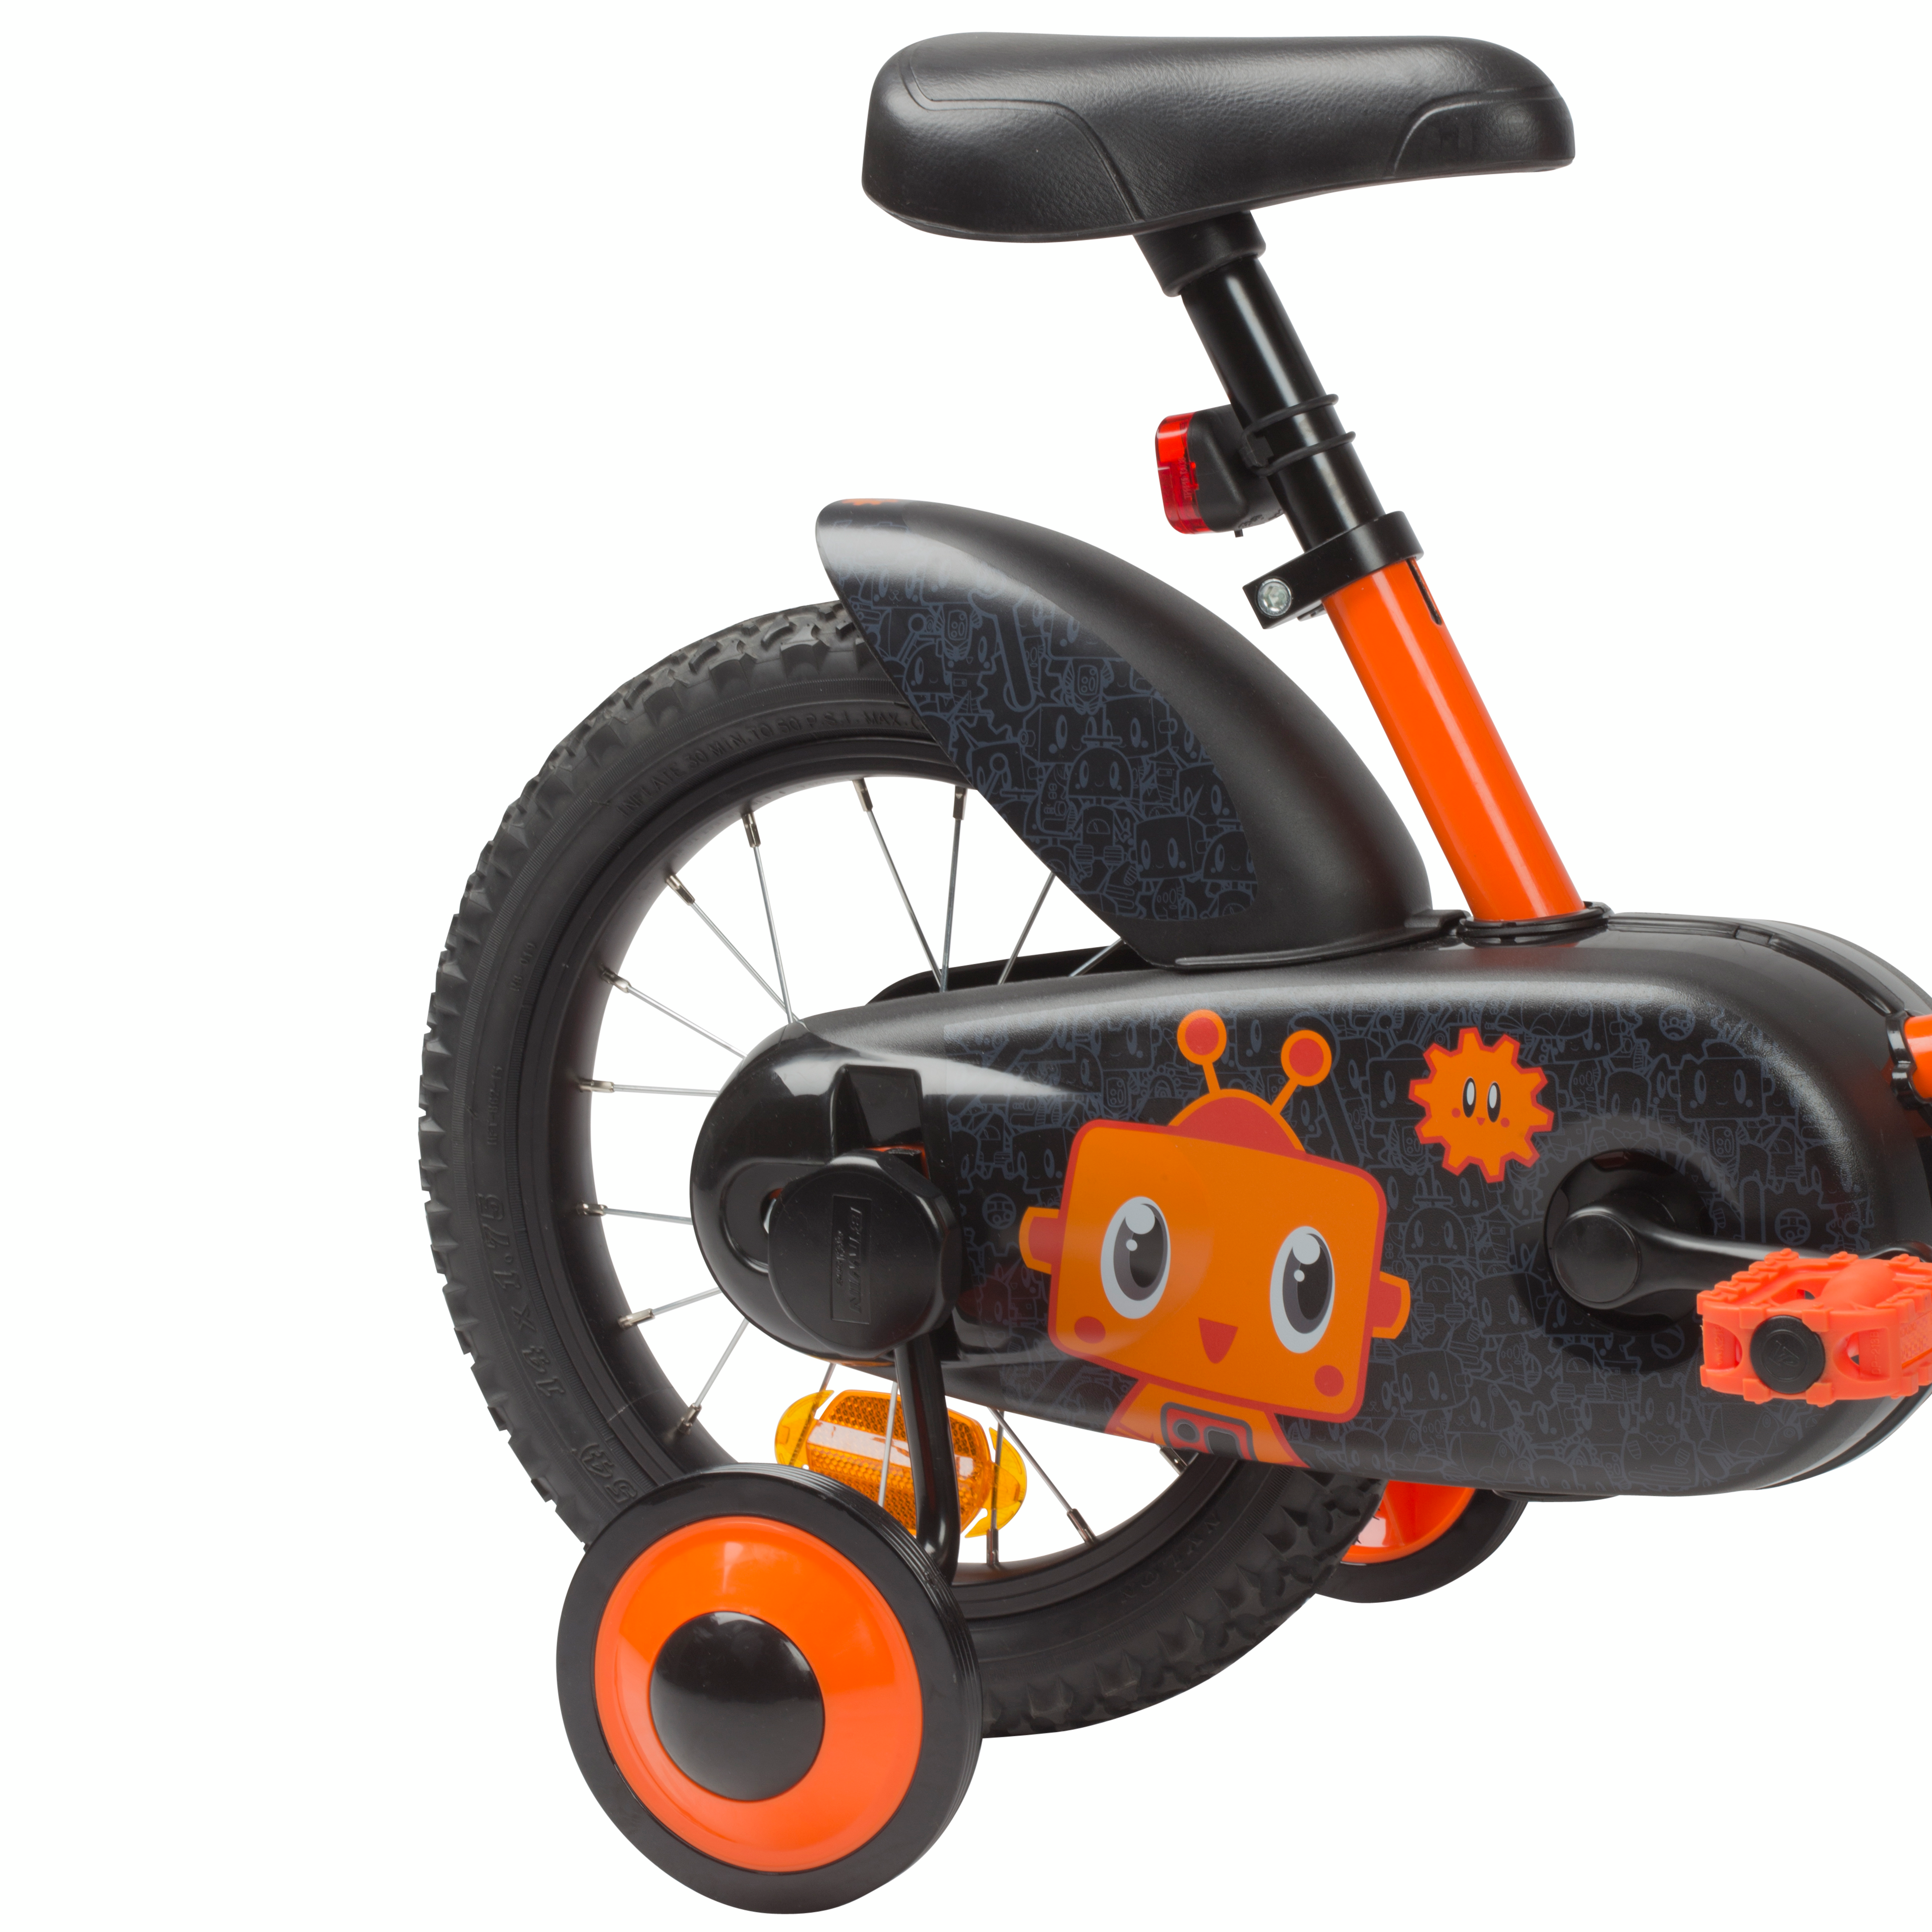 BÉQUILLE VELO ENFANT BTWIN 14 BTWIN